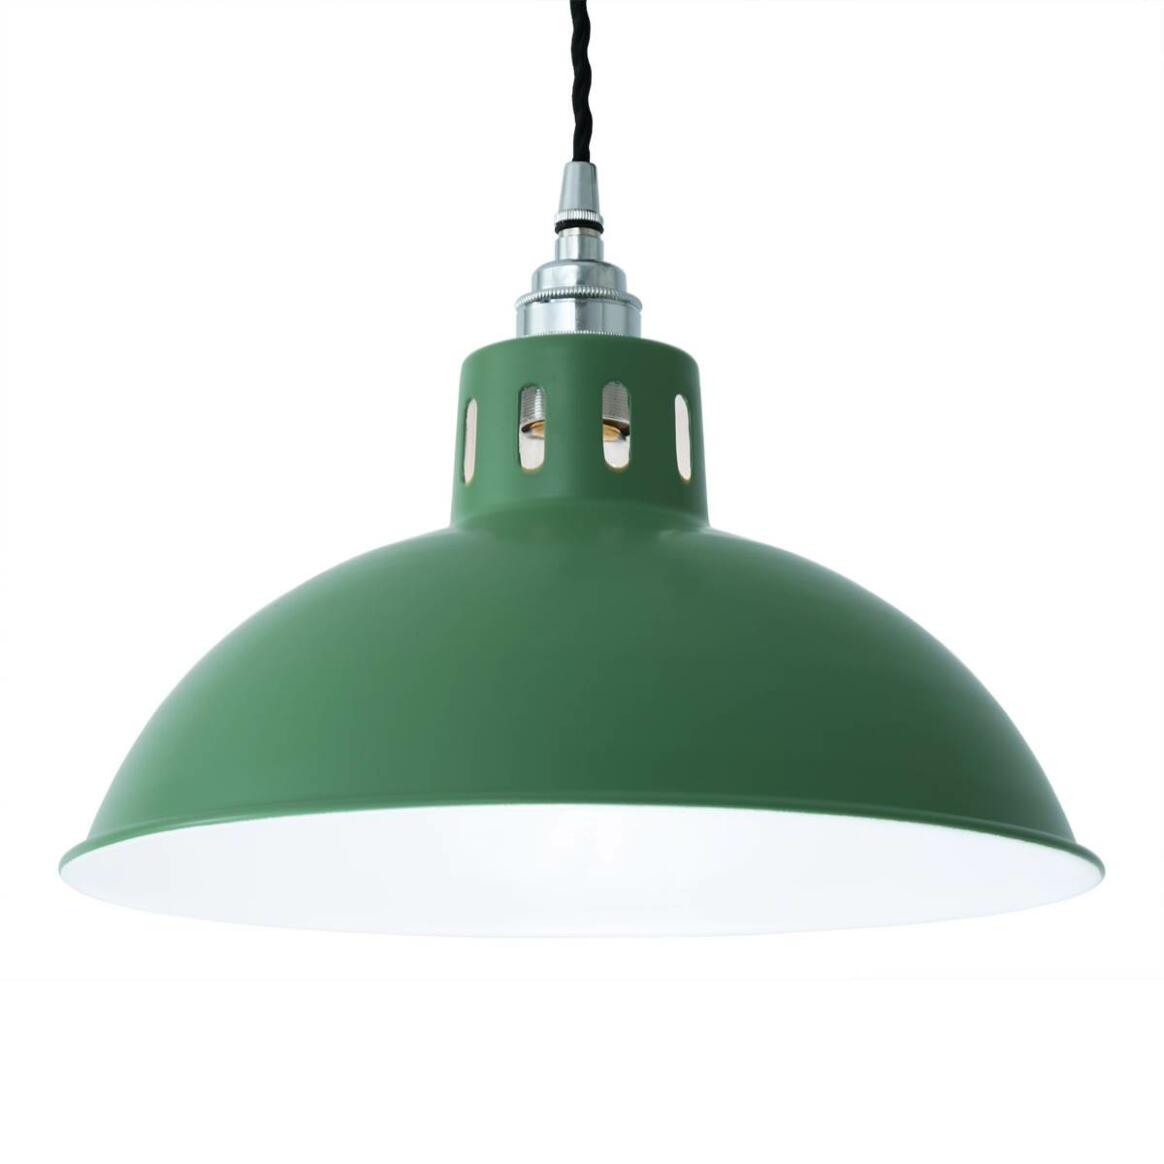 Osson Industrial Factory Pendant Light 30cm main product image